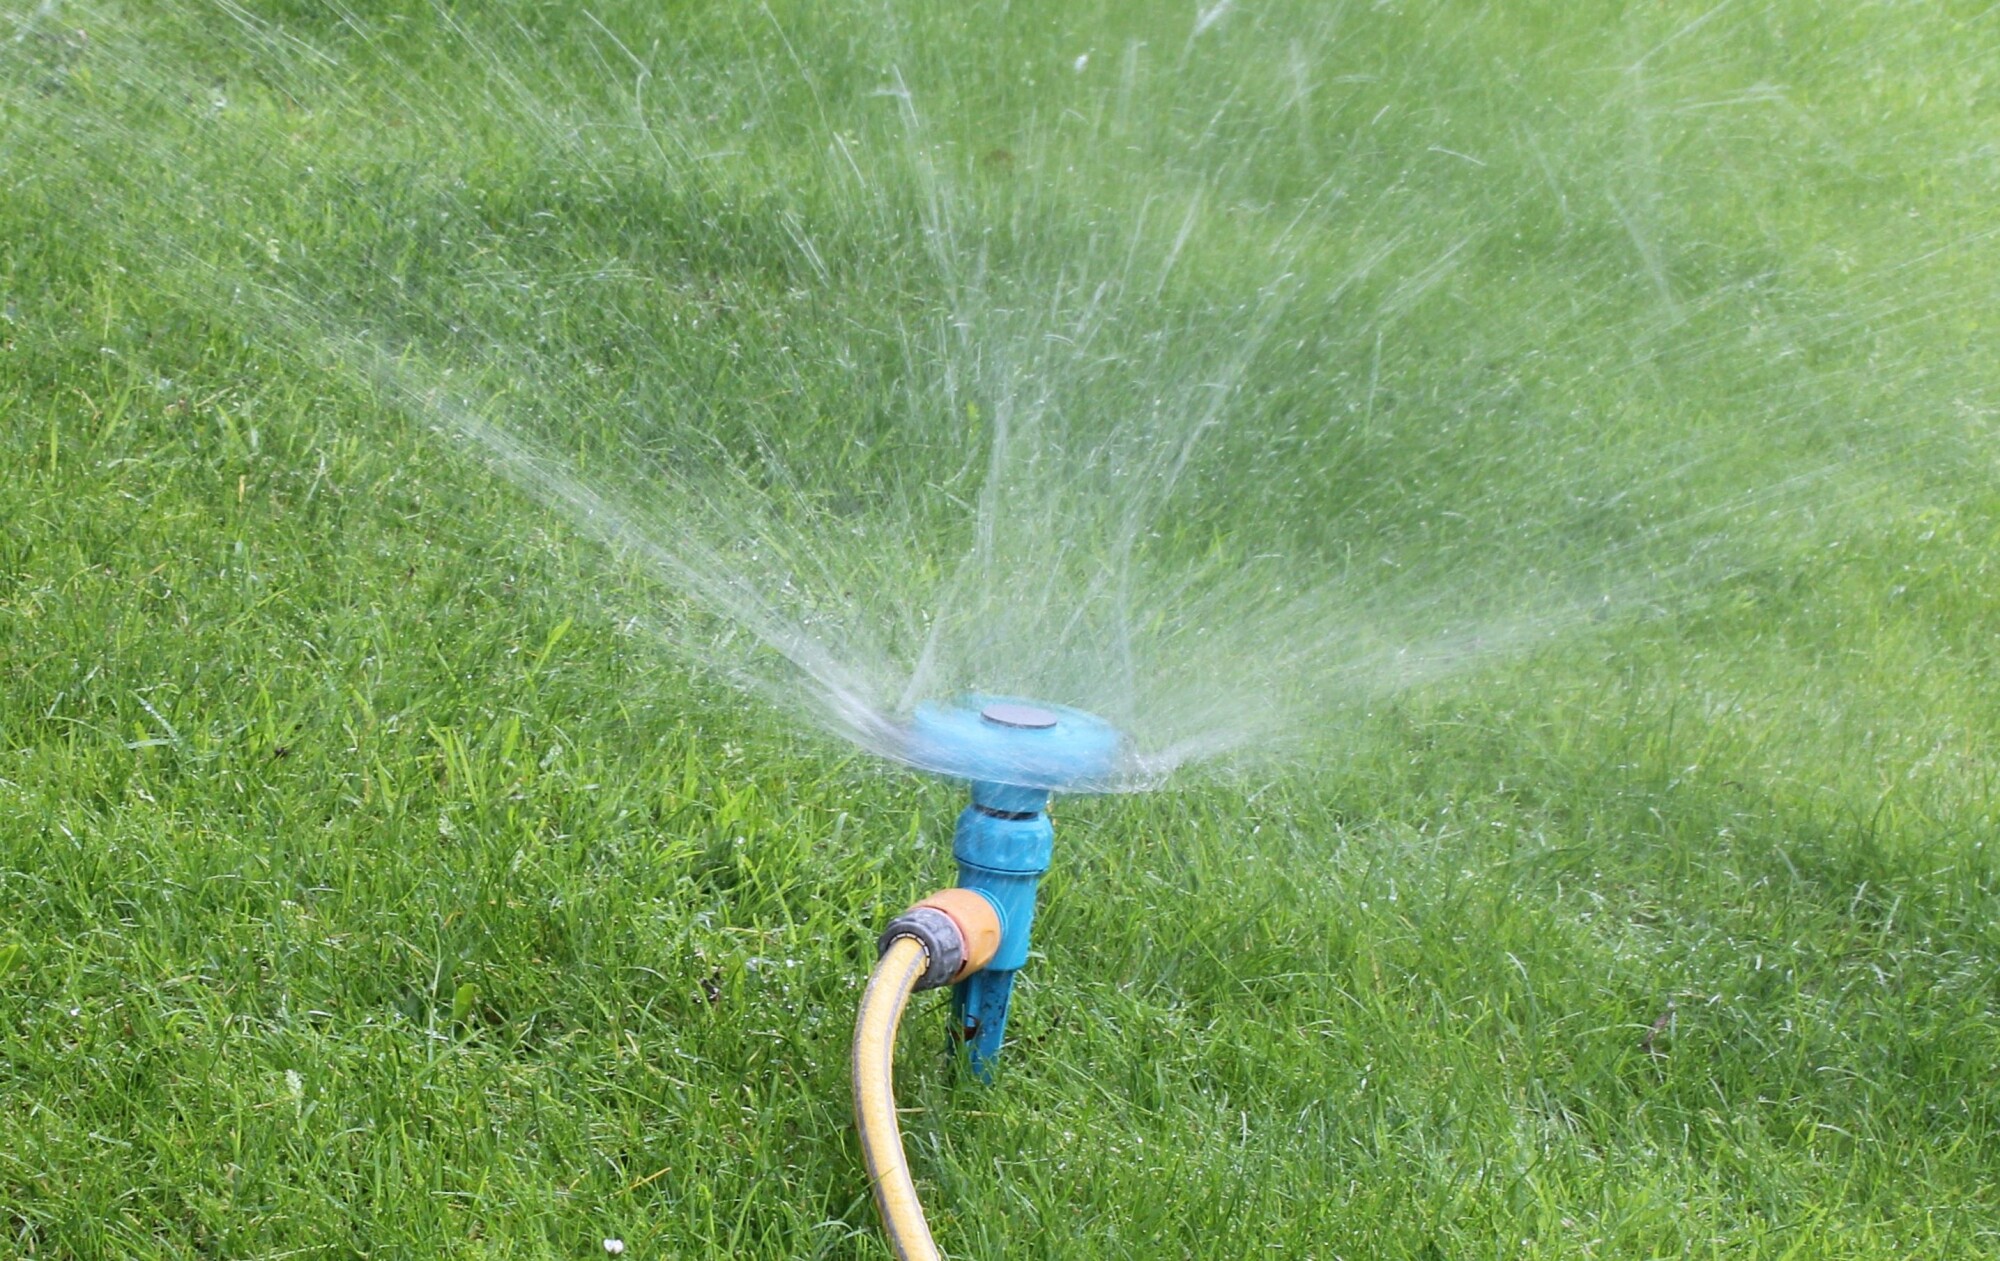 Sprinklers are essential for keeping your lawn looking lush and beautiful. Learn about the different types of sprinkler heads in this guide.